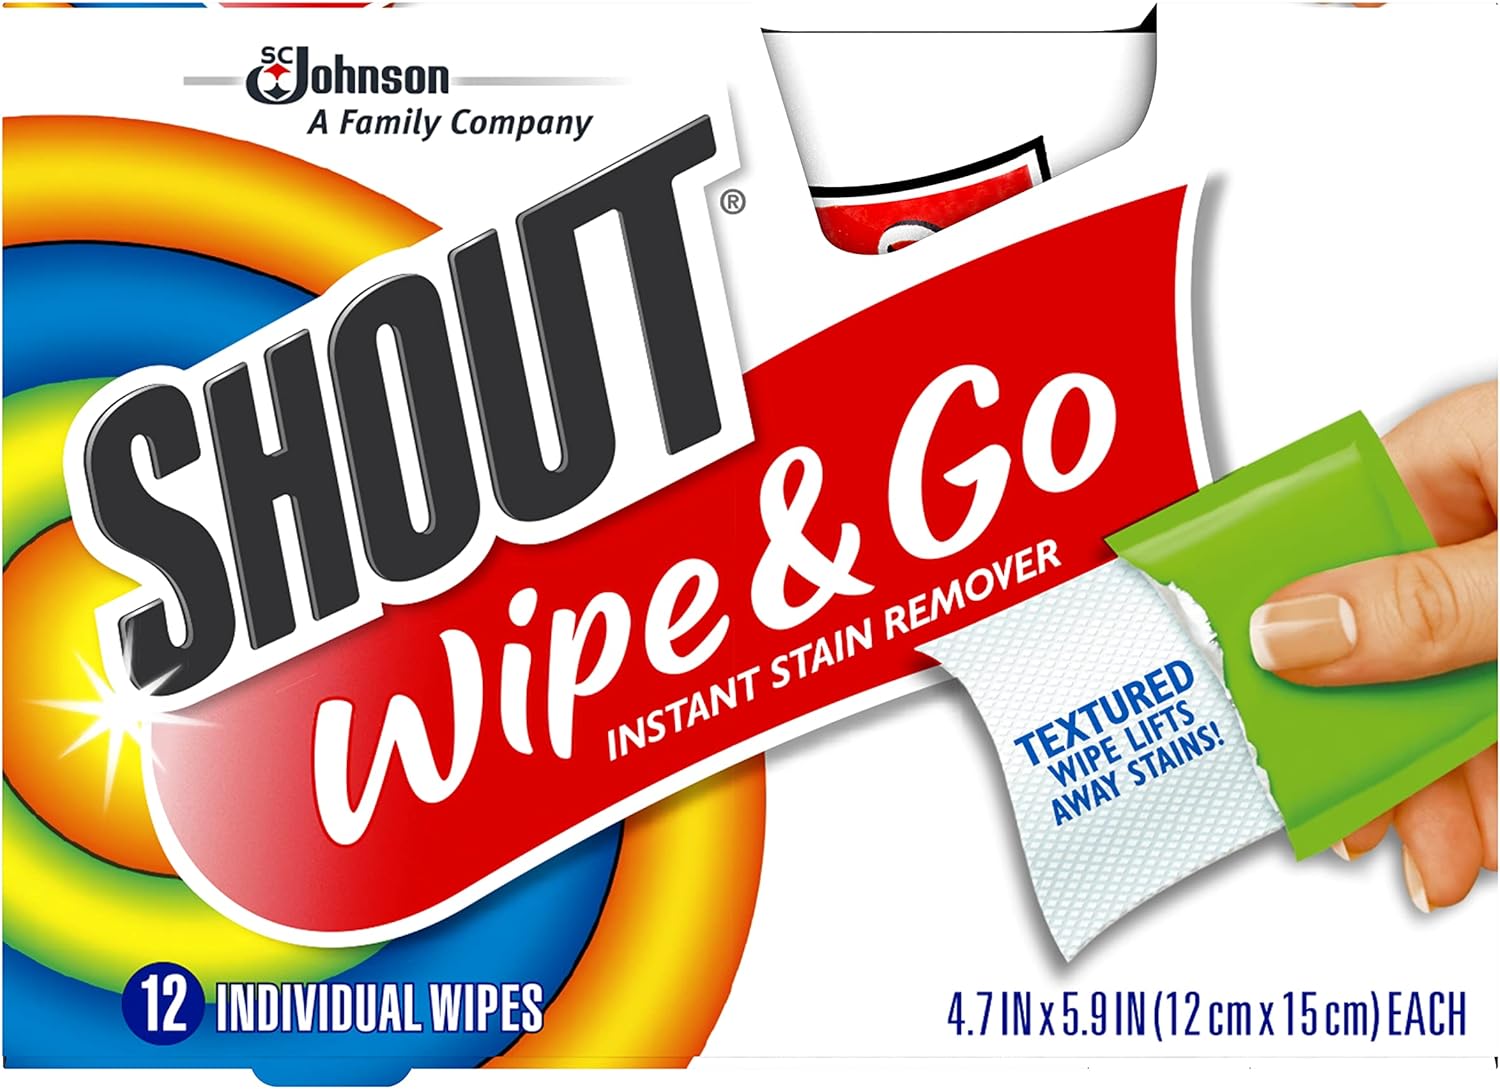 Shout Wipes, Wipe and Go Instant Stain Remover, Laundry Stain and Spot Remover for On-The-Go, 12 Wipes Per Carton - Pack of 6 Cartons (72 Total Wipes)